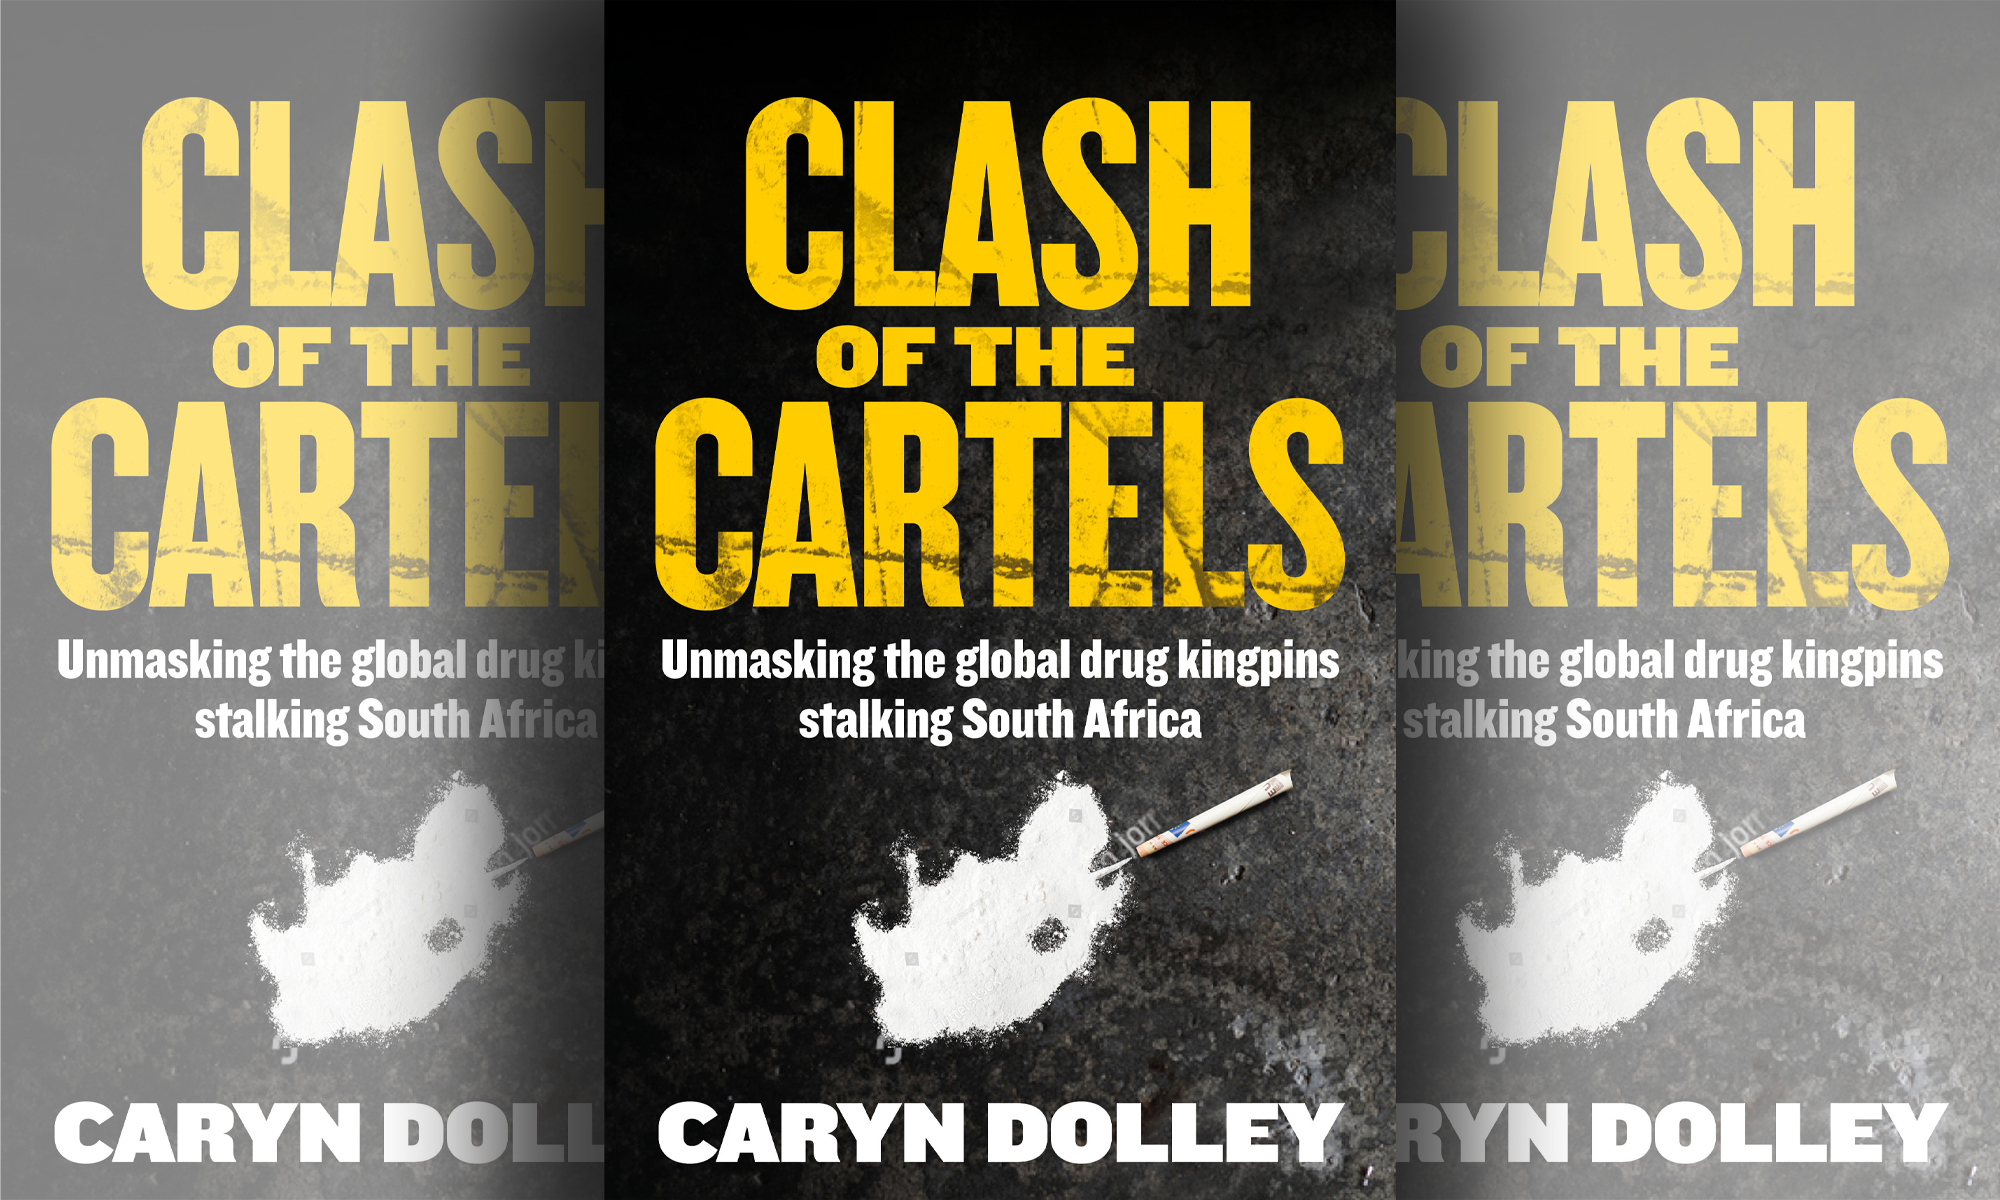 'Clash of the Cartels' by Caryn Dolley book cover. Image: Daily Maverick